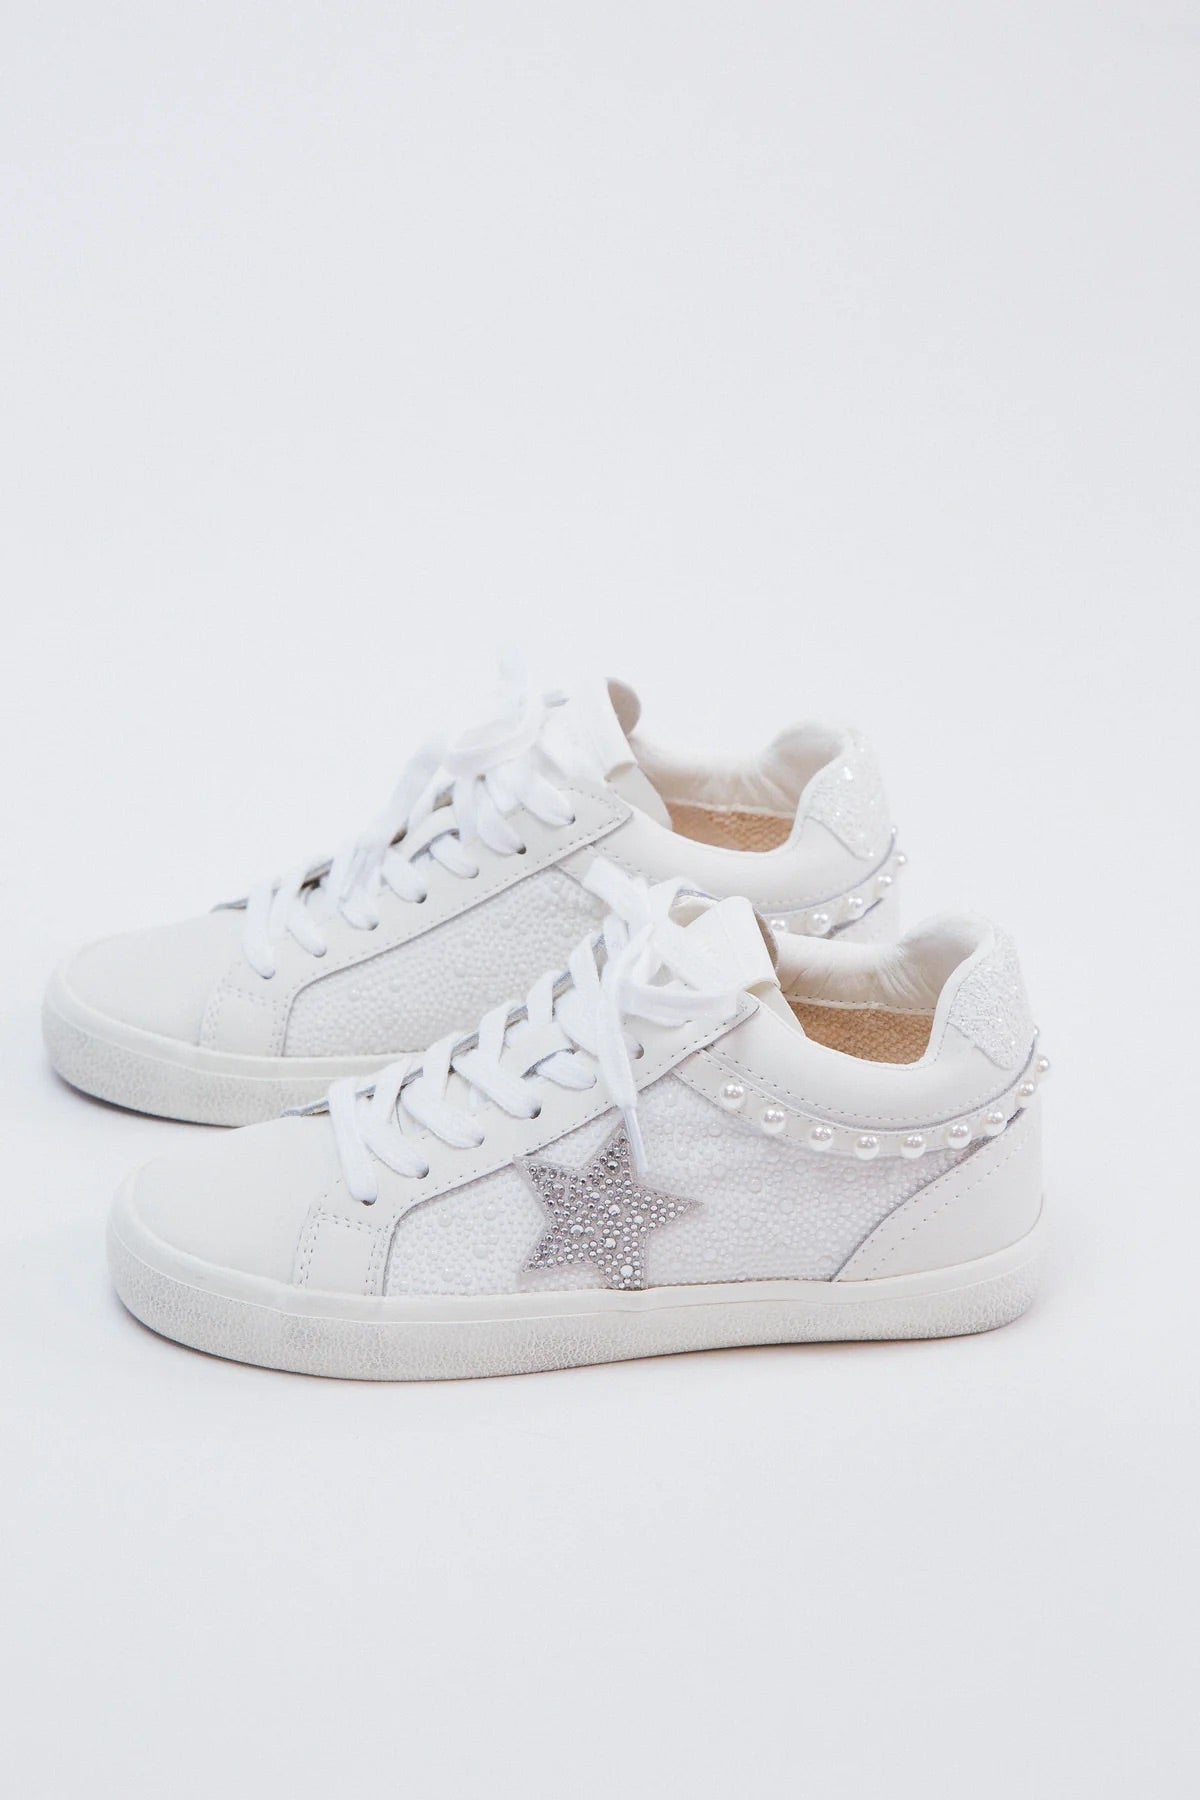 Perscila White Pearl Mid Top Sneakers